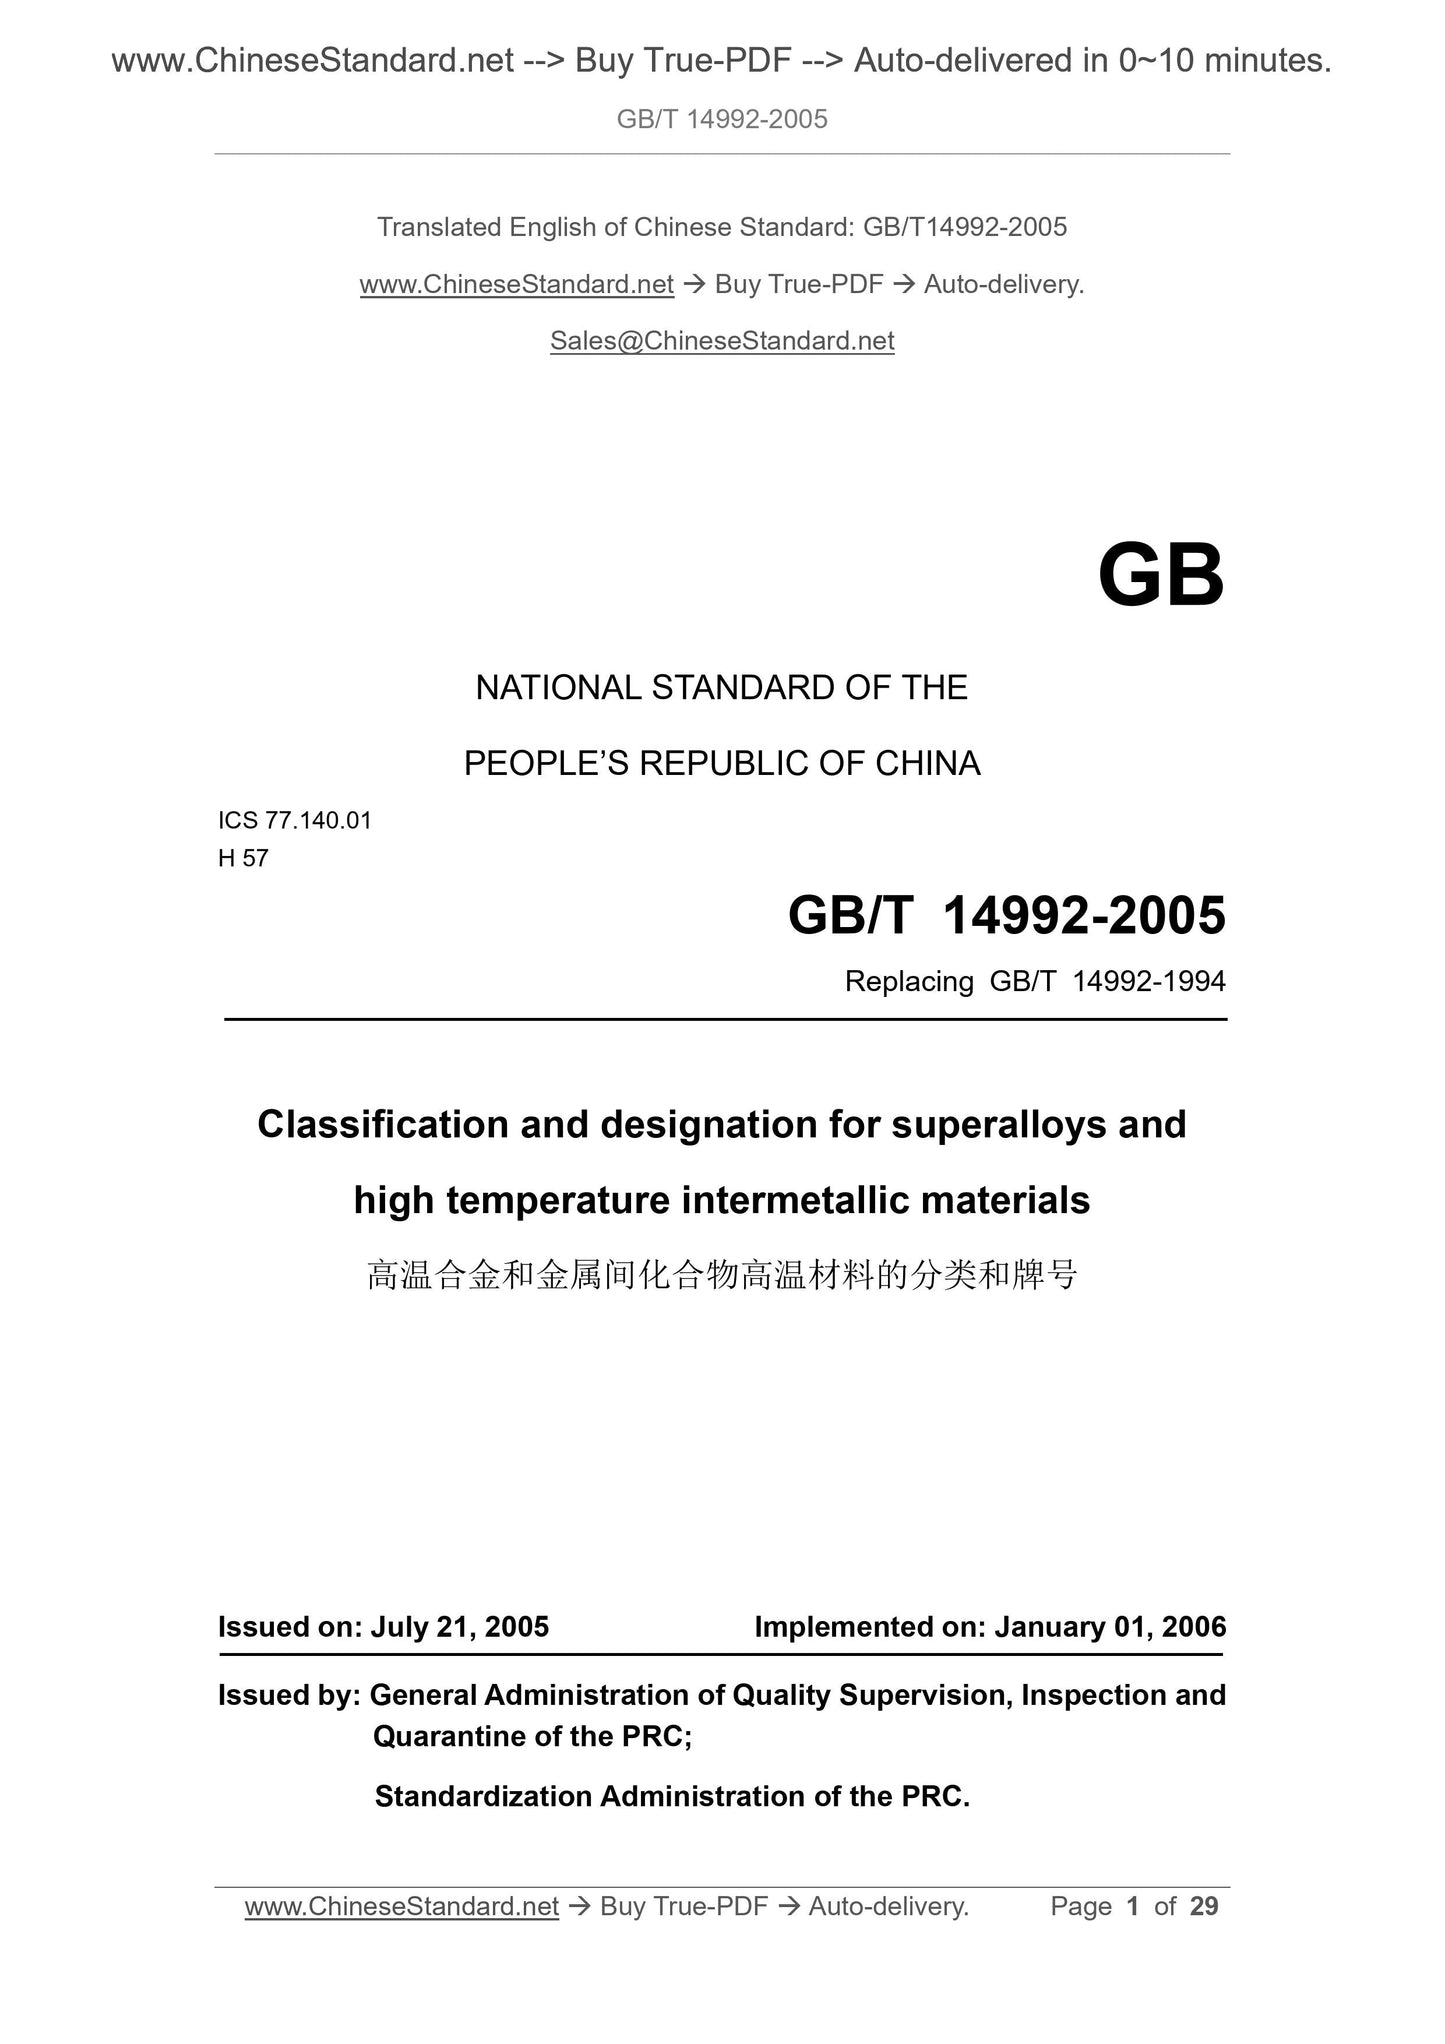 GB/T 14992-2005 Page 1